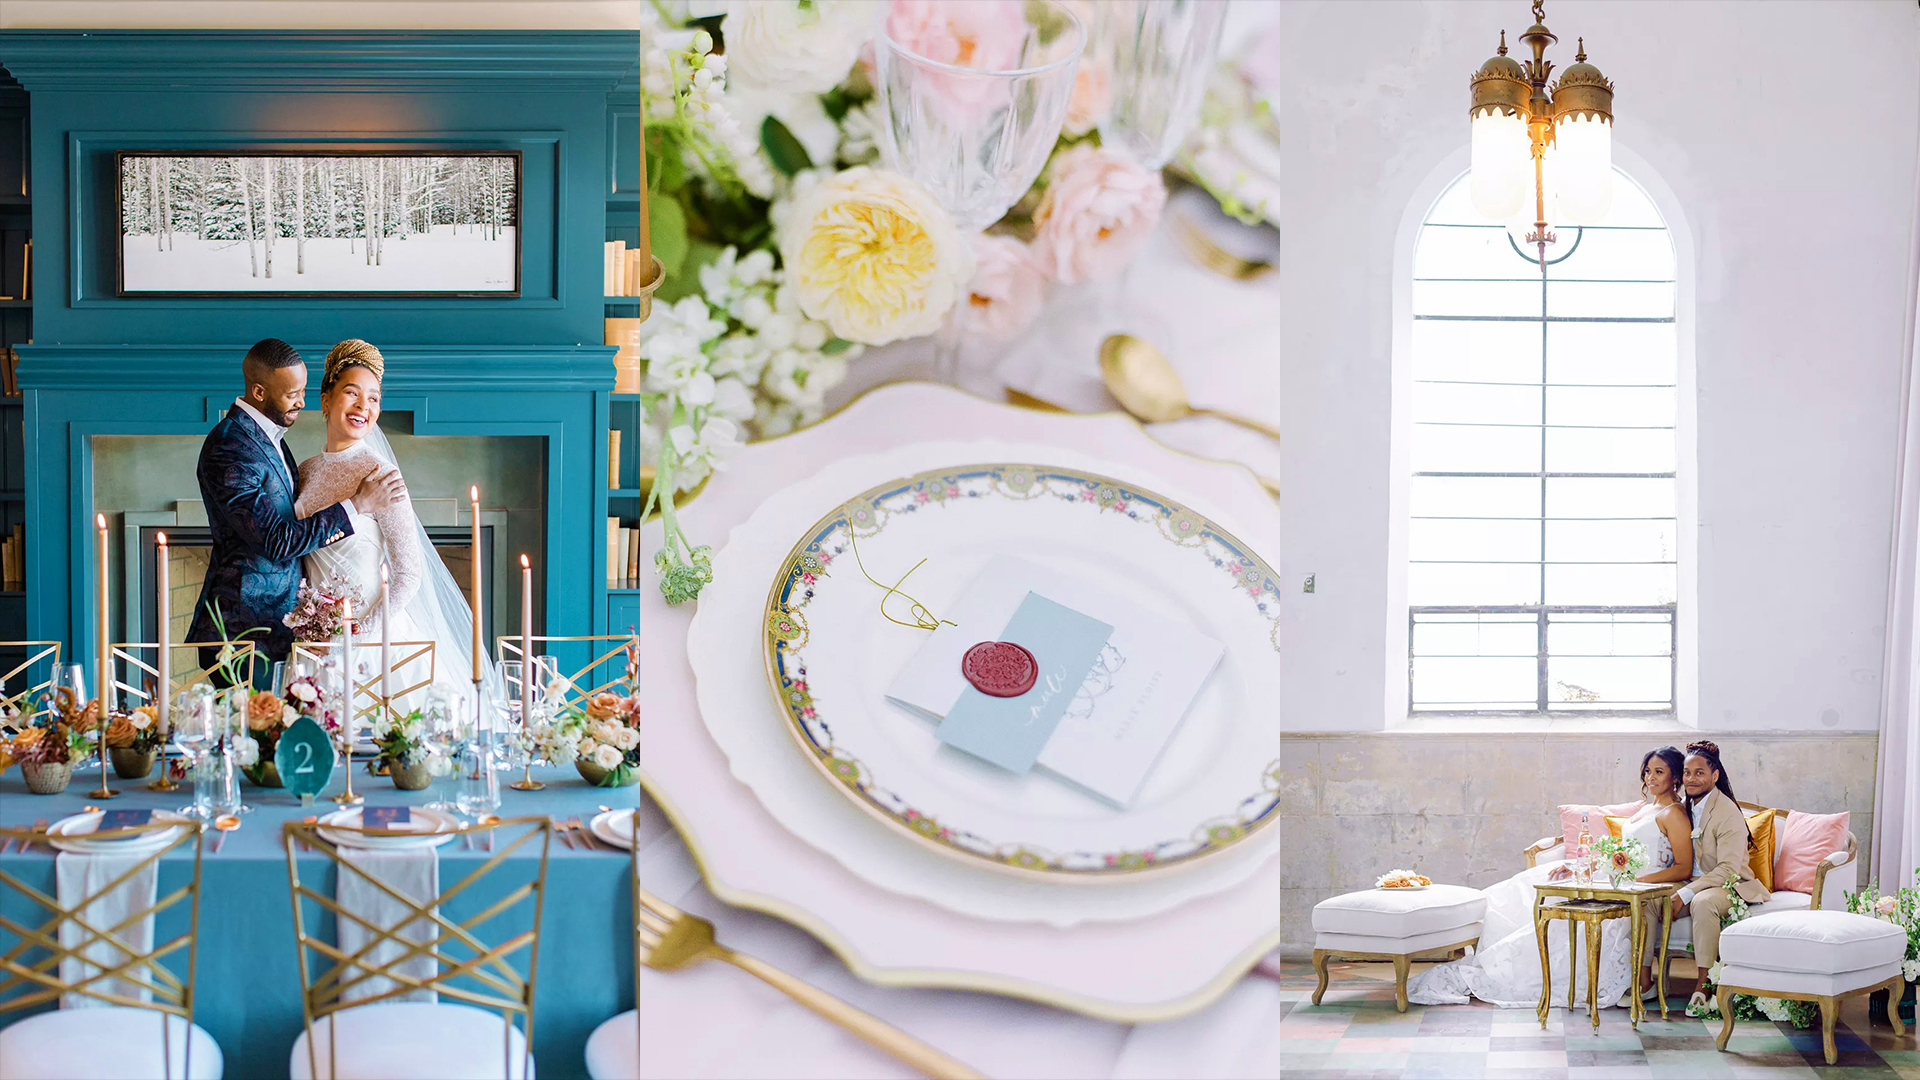 The Top Wedding Trends Of 2021 - Welcome To The Year Of Intentionality